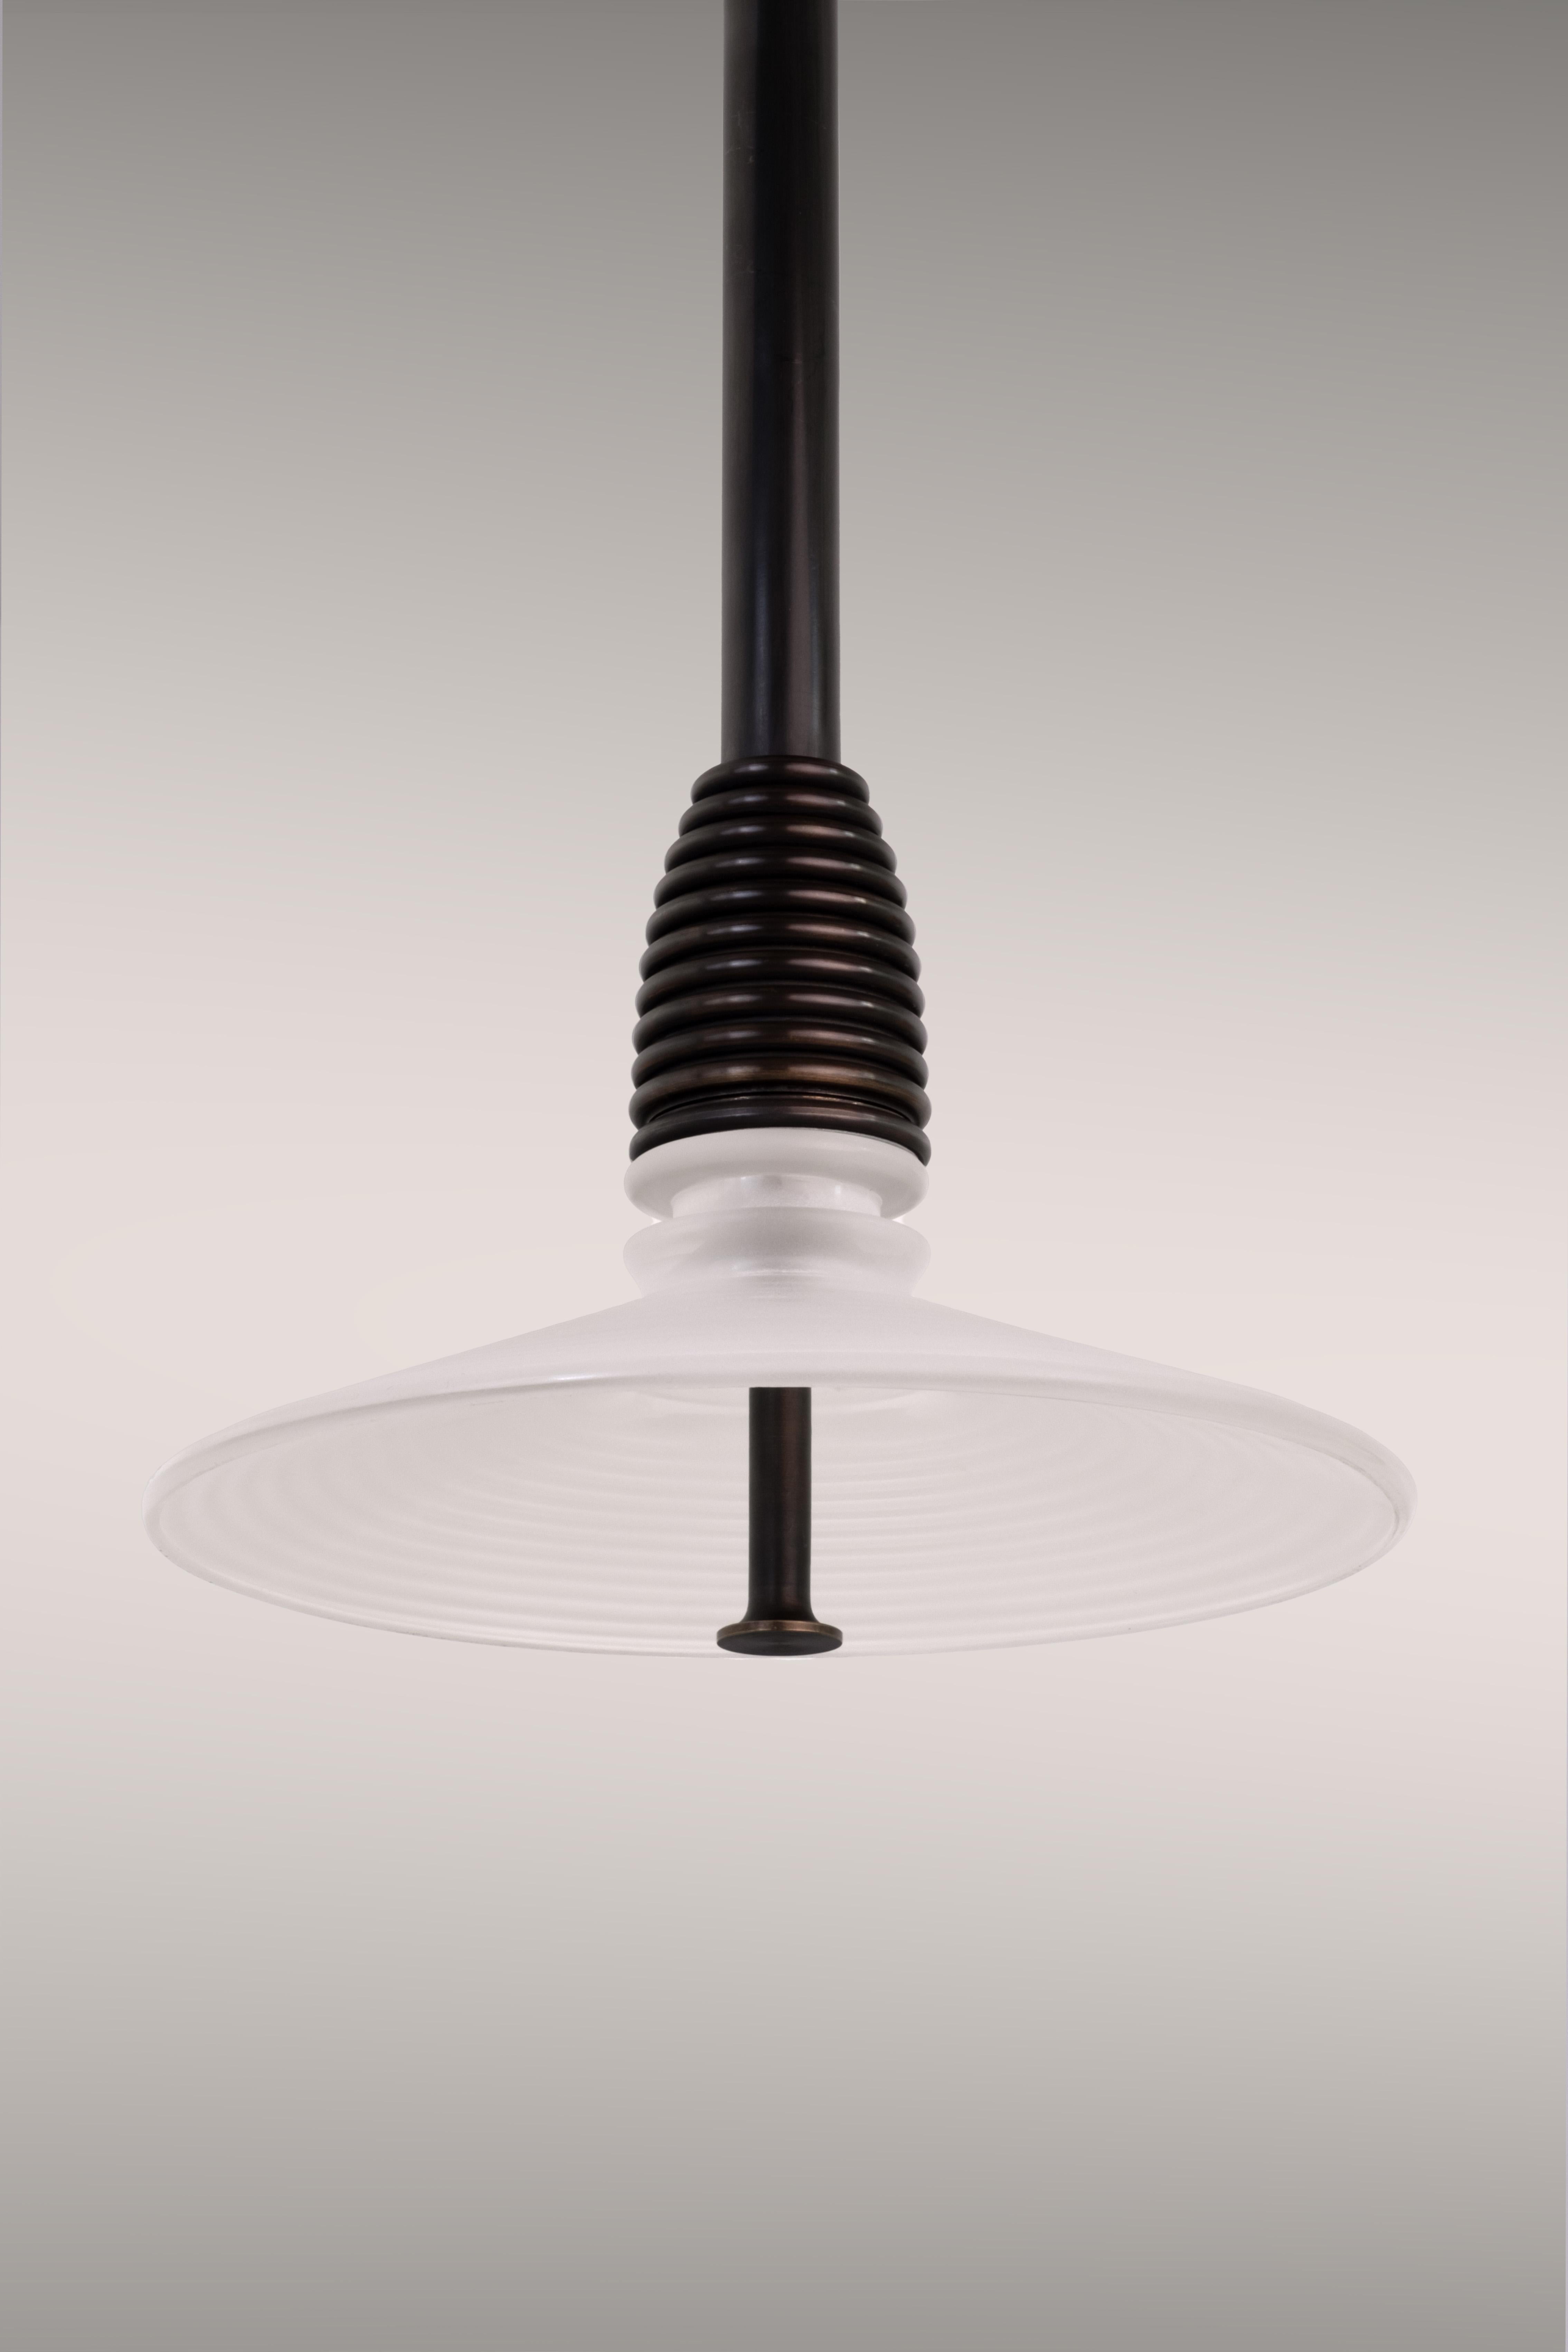 British The Insulator 'B' Pendant in dark brass and clear glass by NOVOCASTRIAN deco For Sale